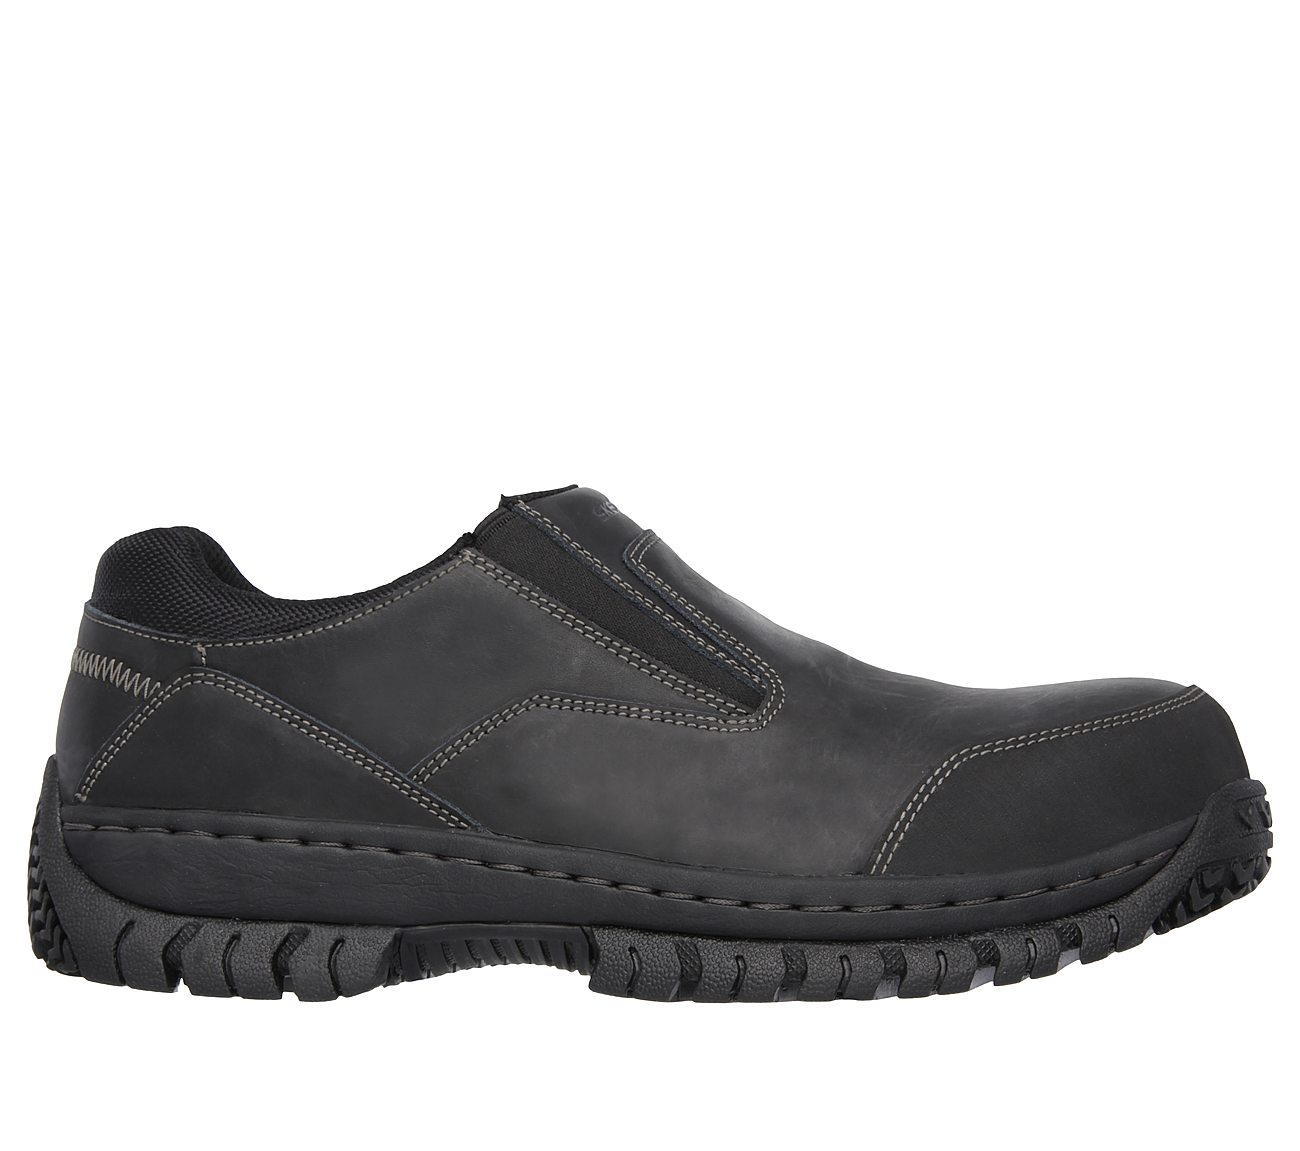 skechers leather work shoes Sale,up to 